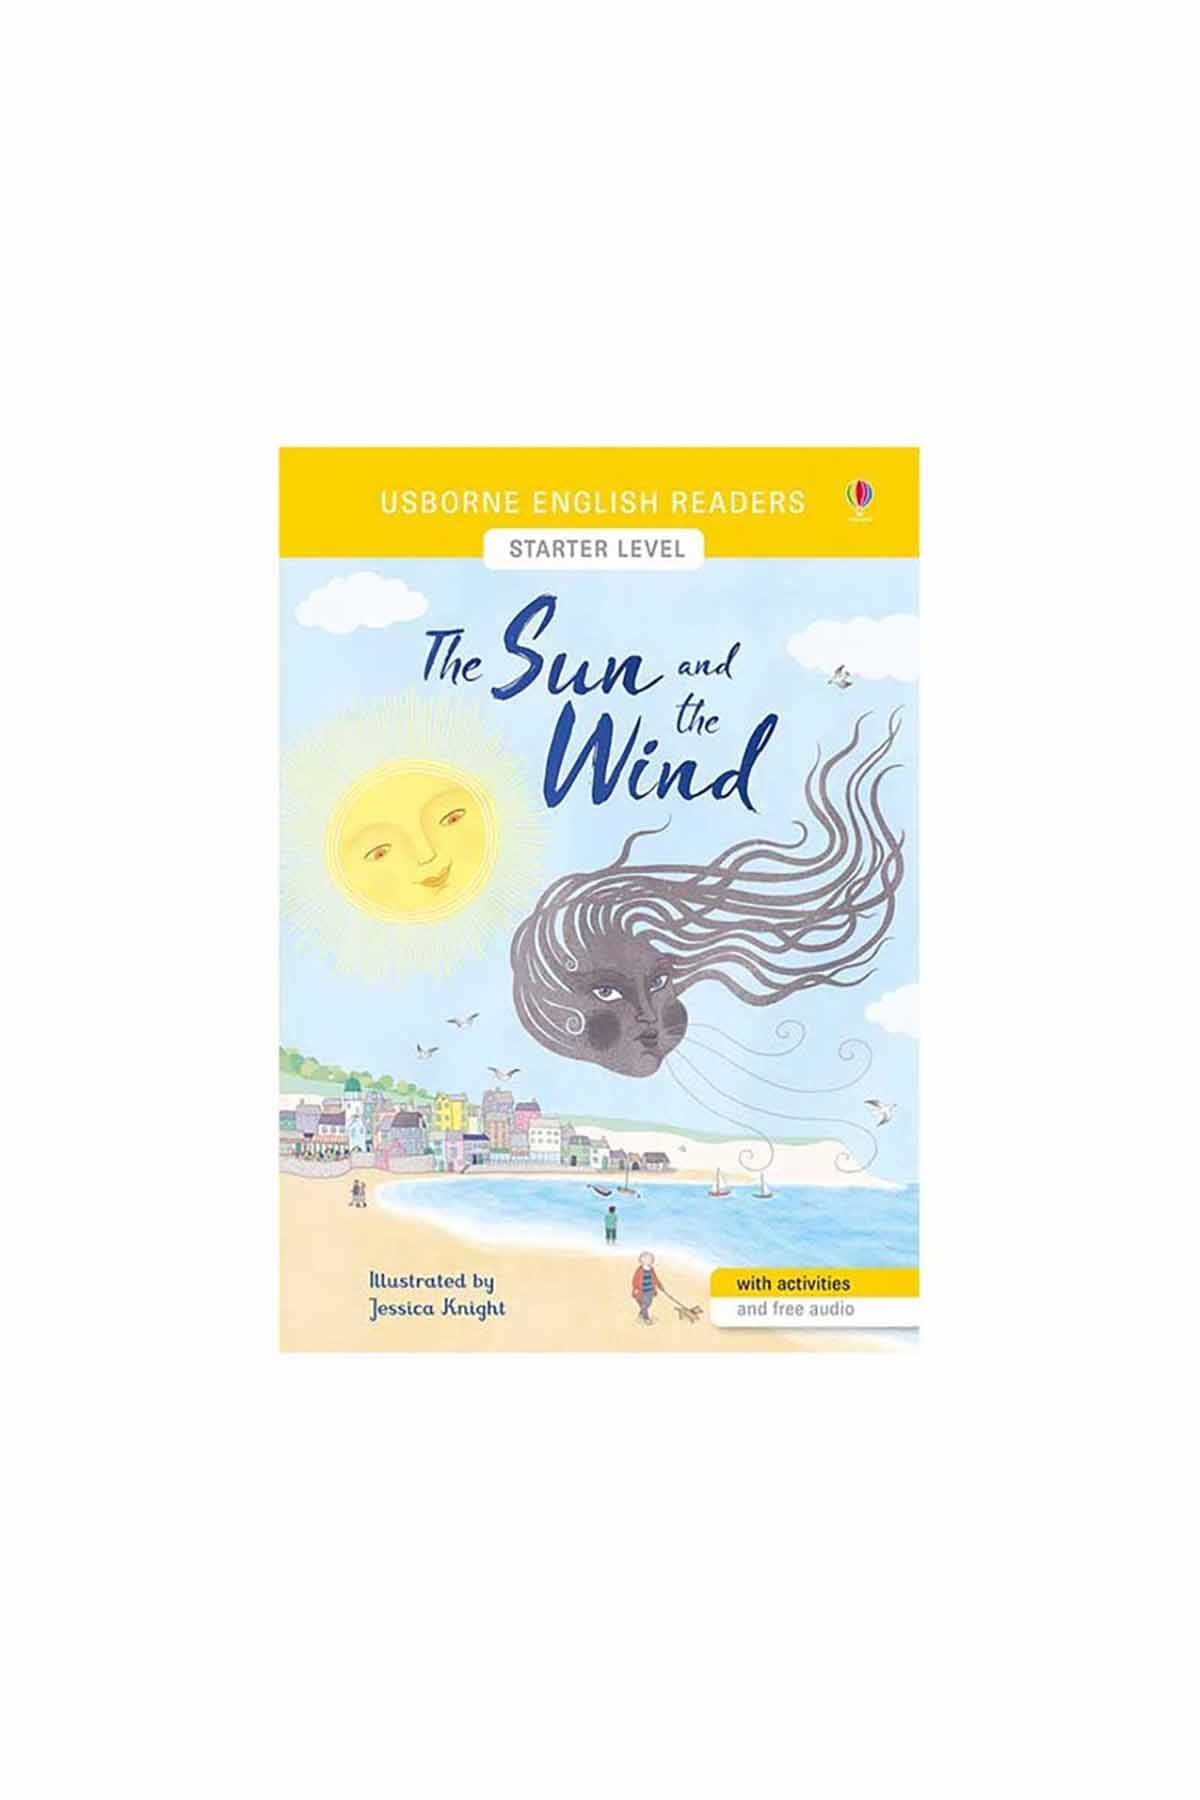 The Usborne English Readers Starter Level: The Sun and the Wind